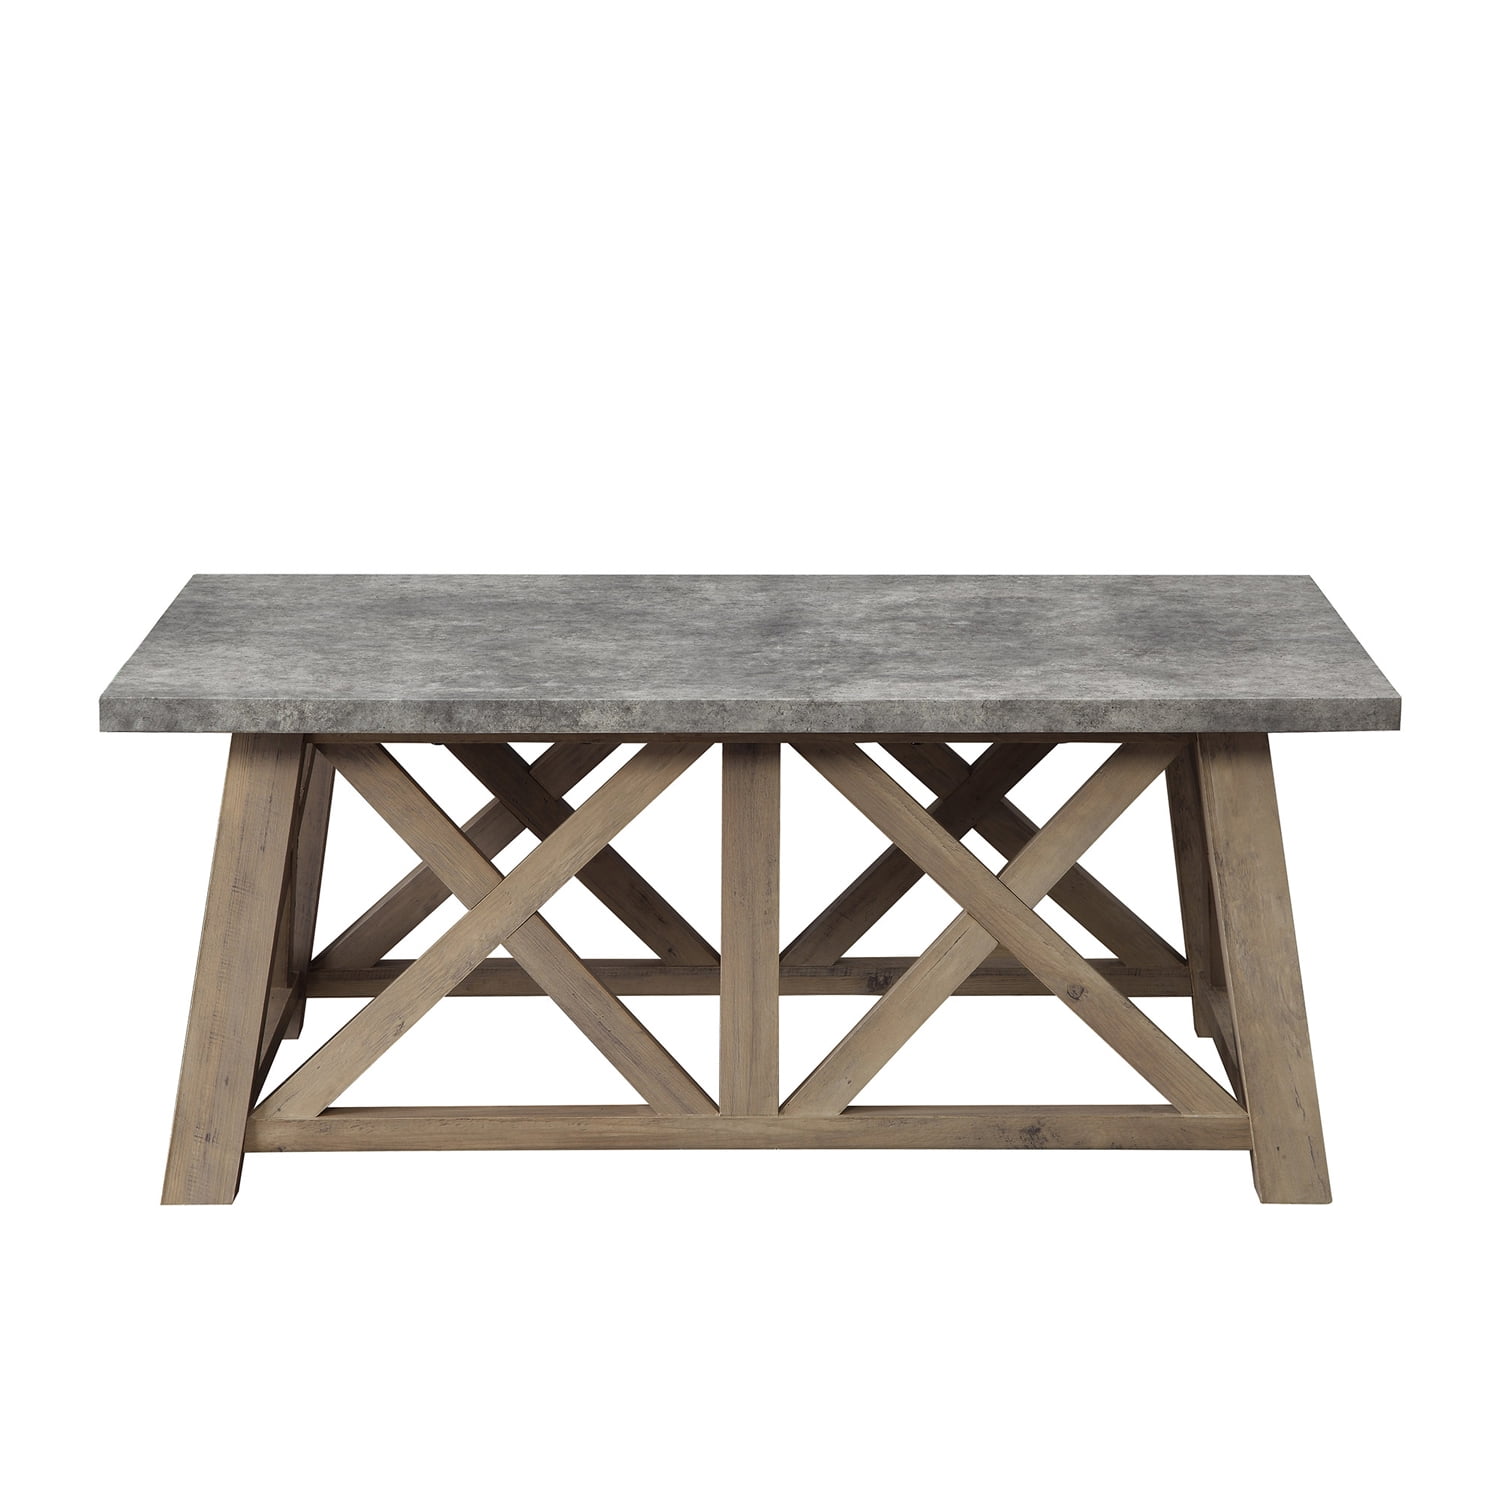 Details about   Better Homes & Gardens Granary Modern Farmhouse Coffee Table Elegant Rustic Gray 